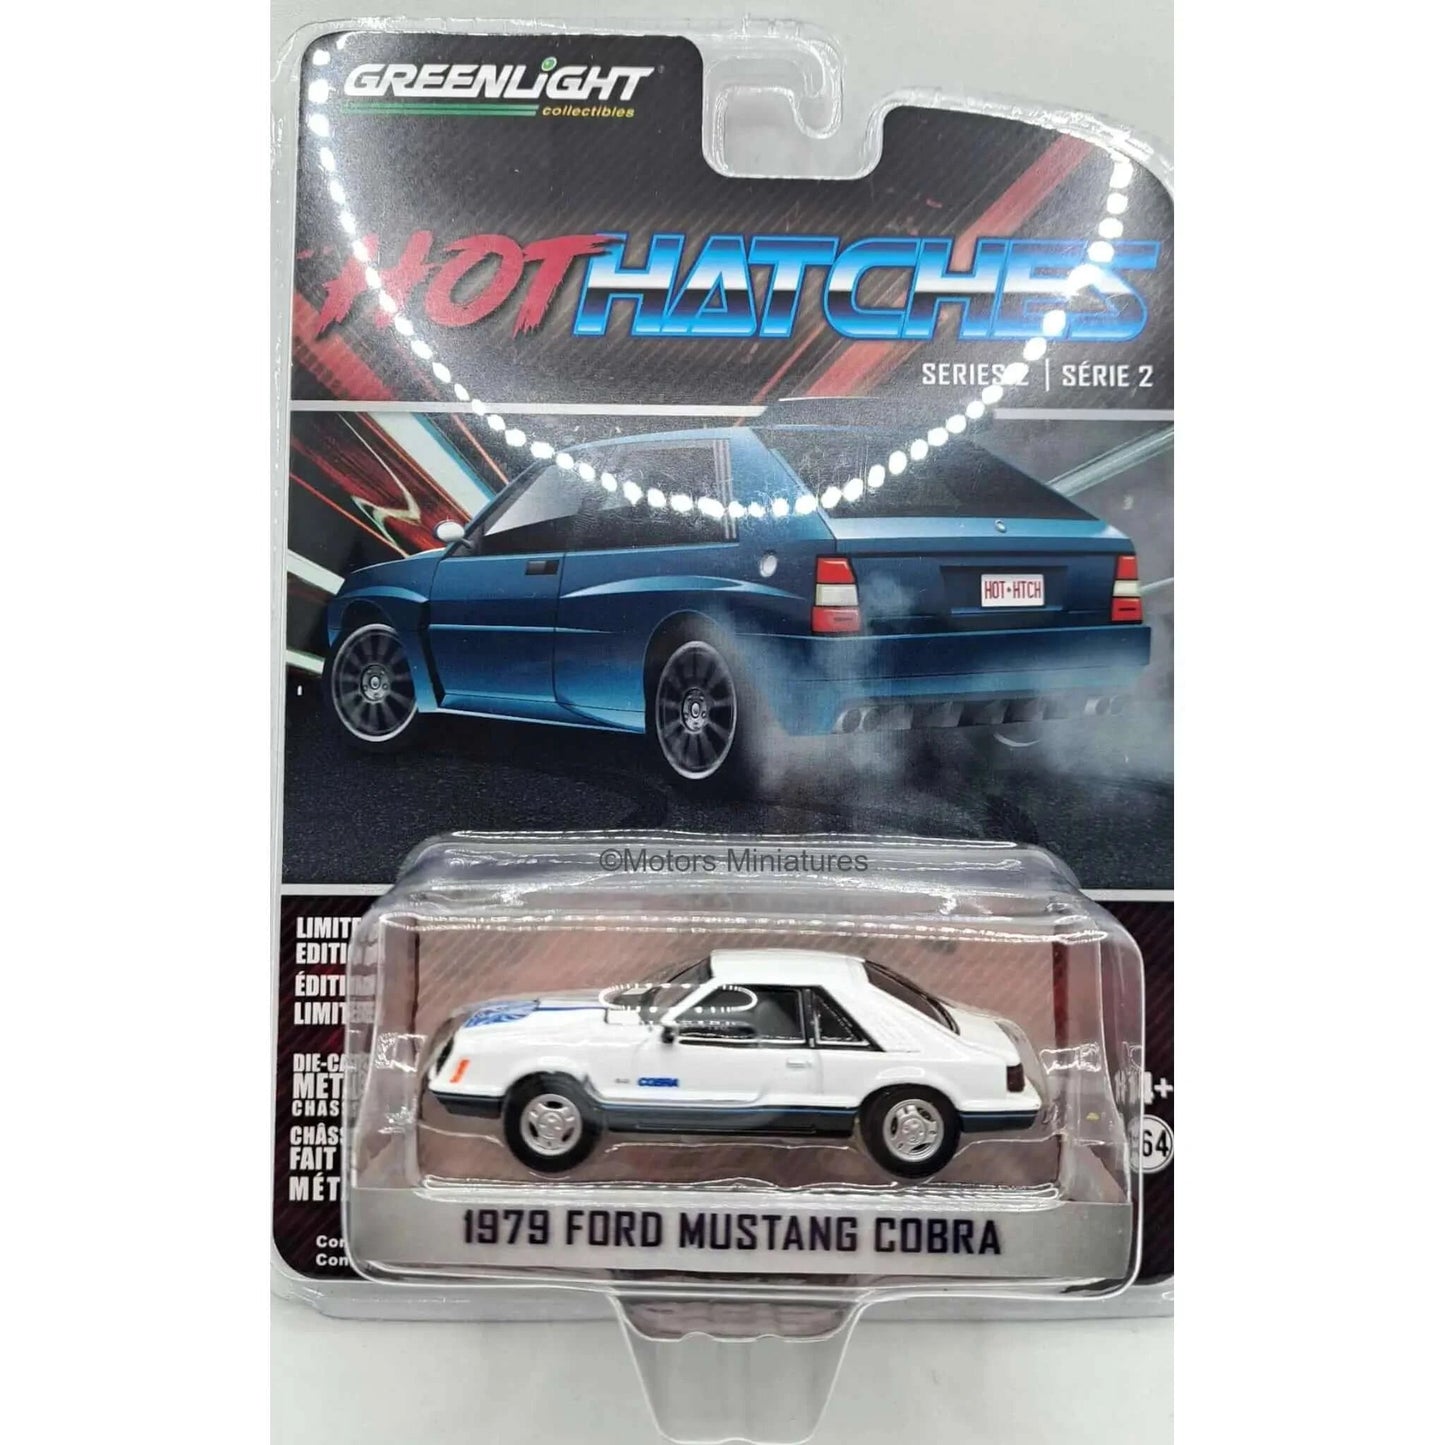 Ford Mustang Cobra 1979 Hot Hatches série 2 Greenlight 1/64 - gl63020-5